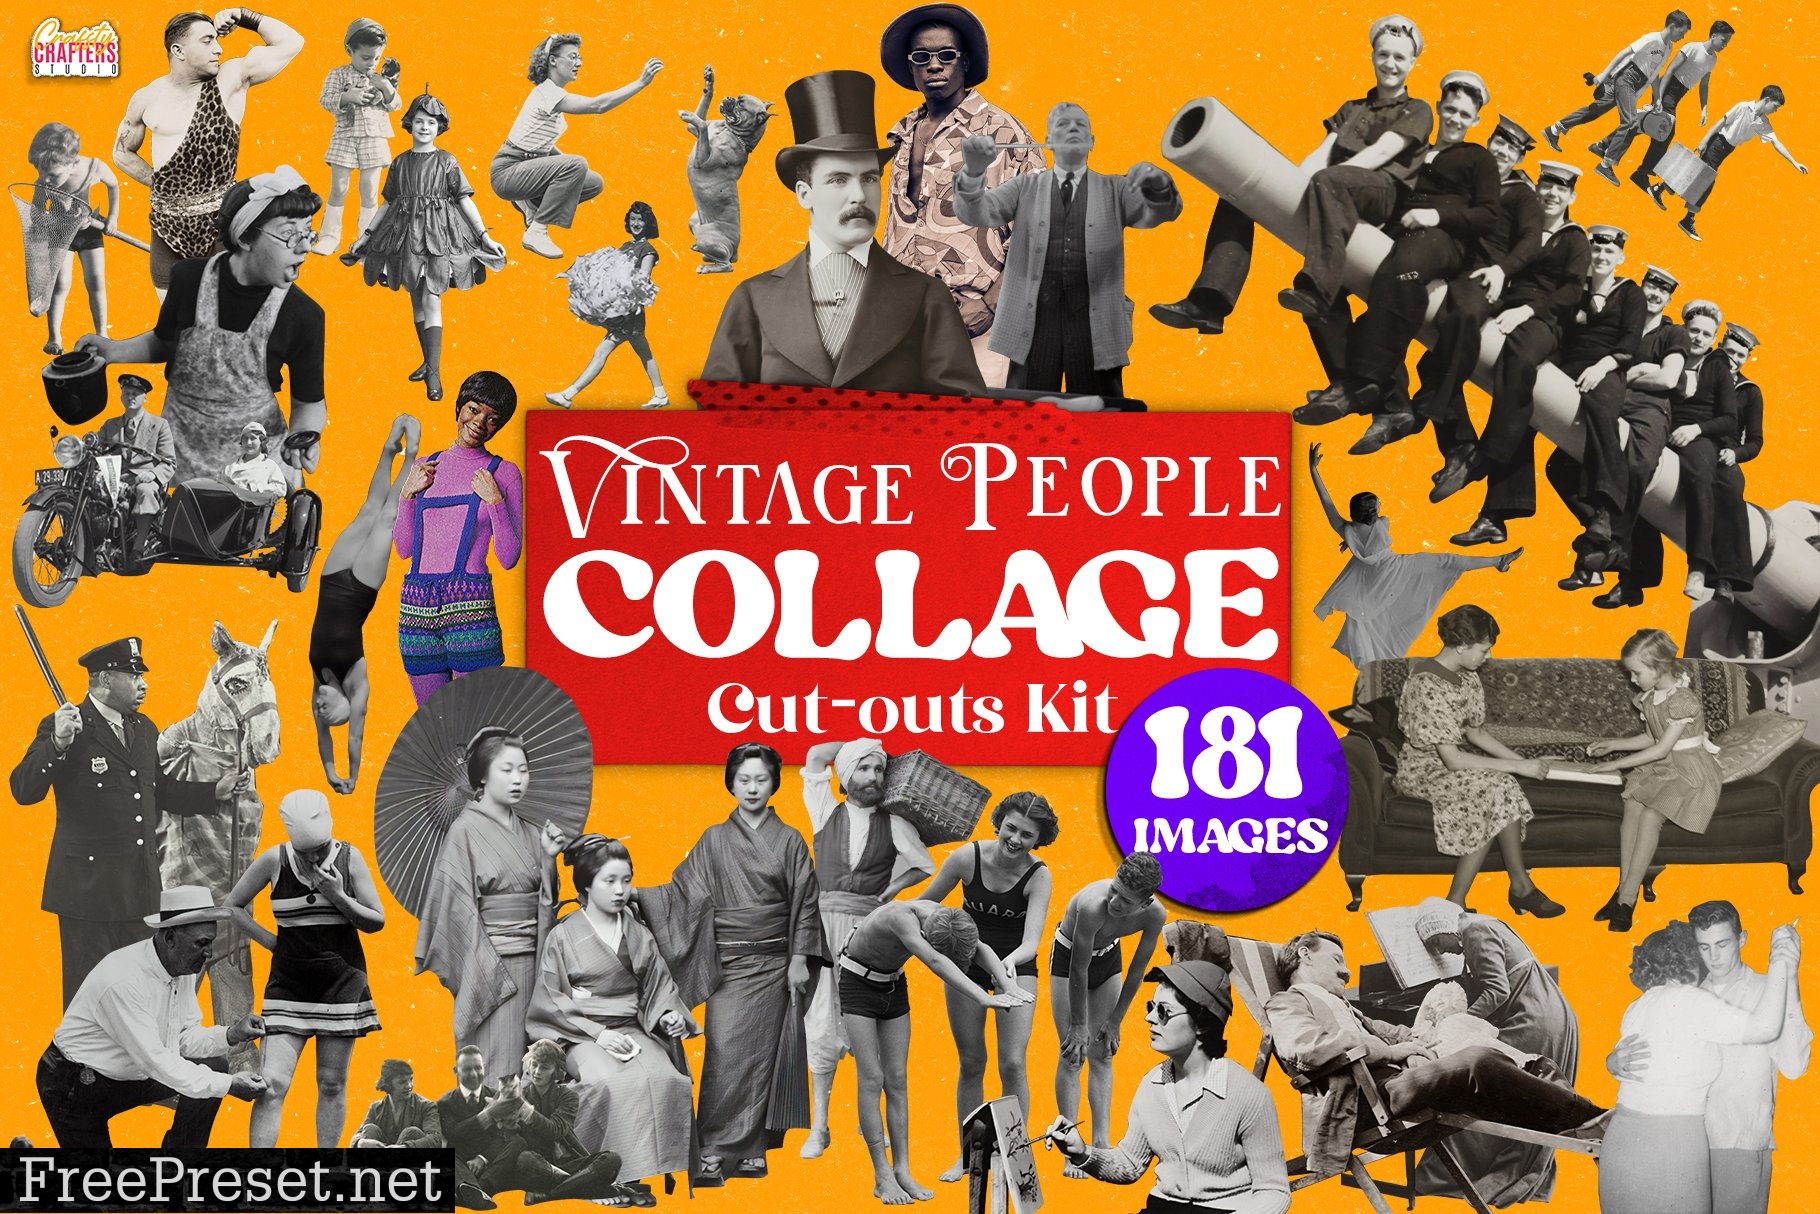 Vintage People Collage Cut-Outs Kit - 7024421